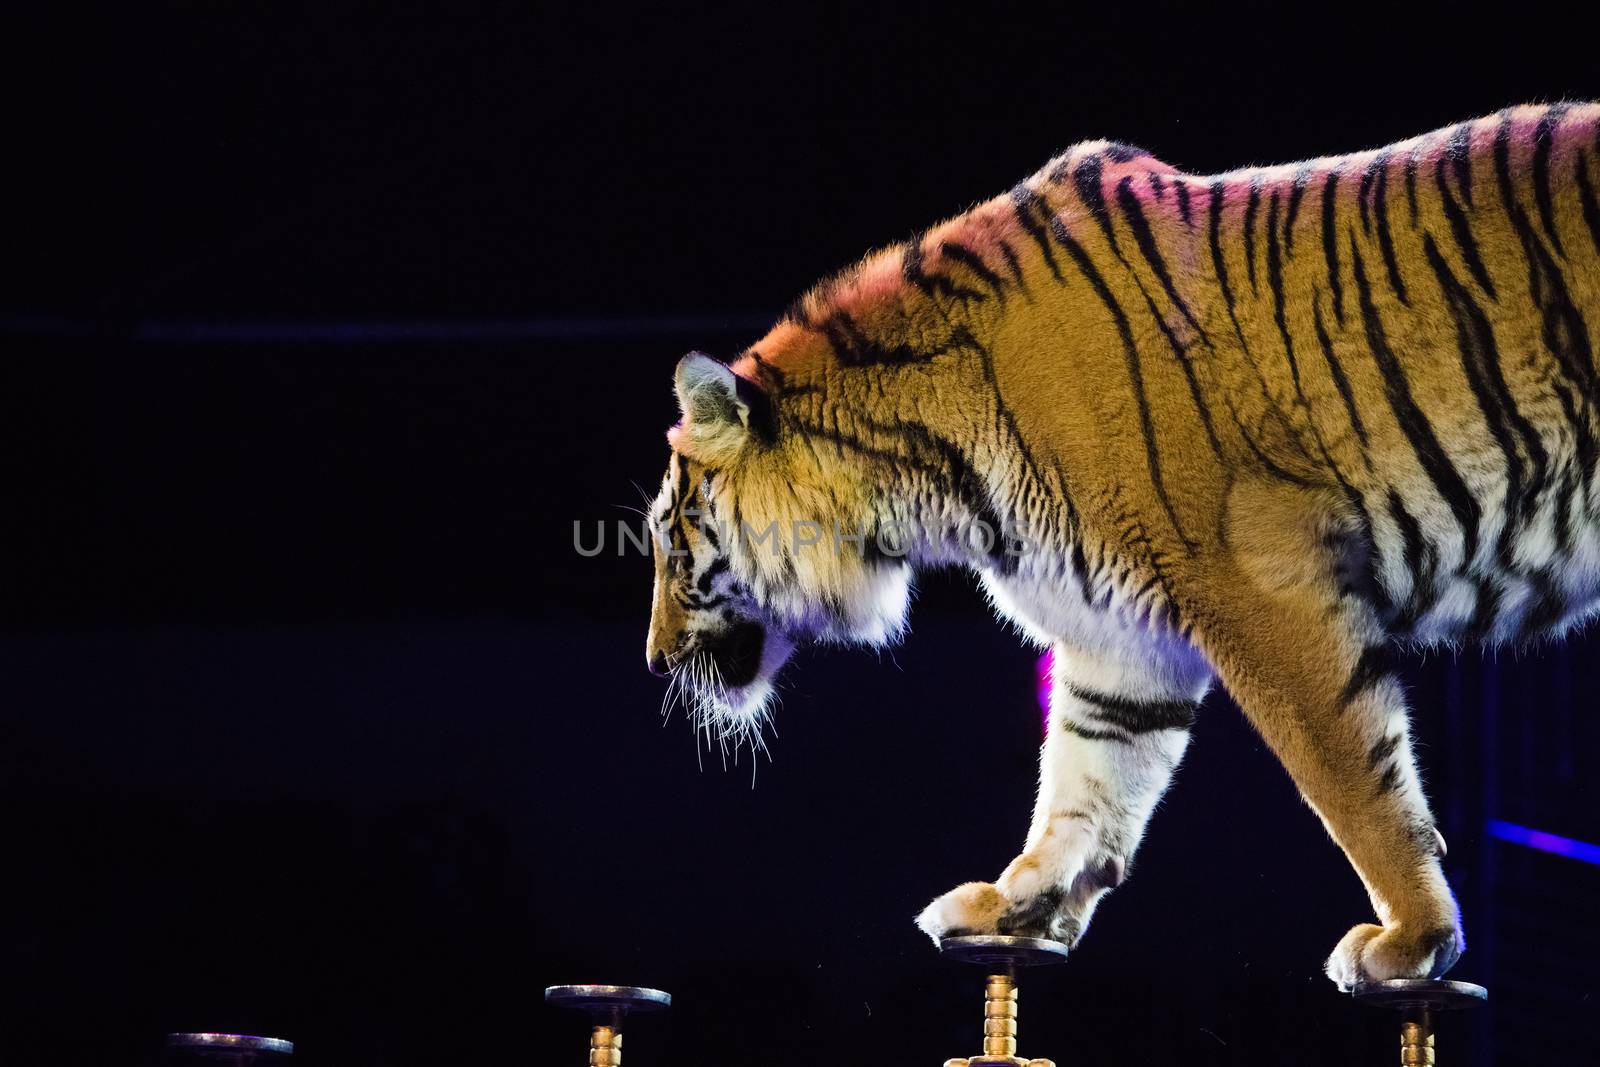 Tiger performs tricks in the circus arena by grigorenko